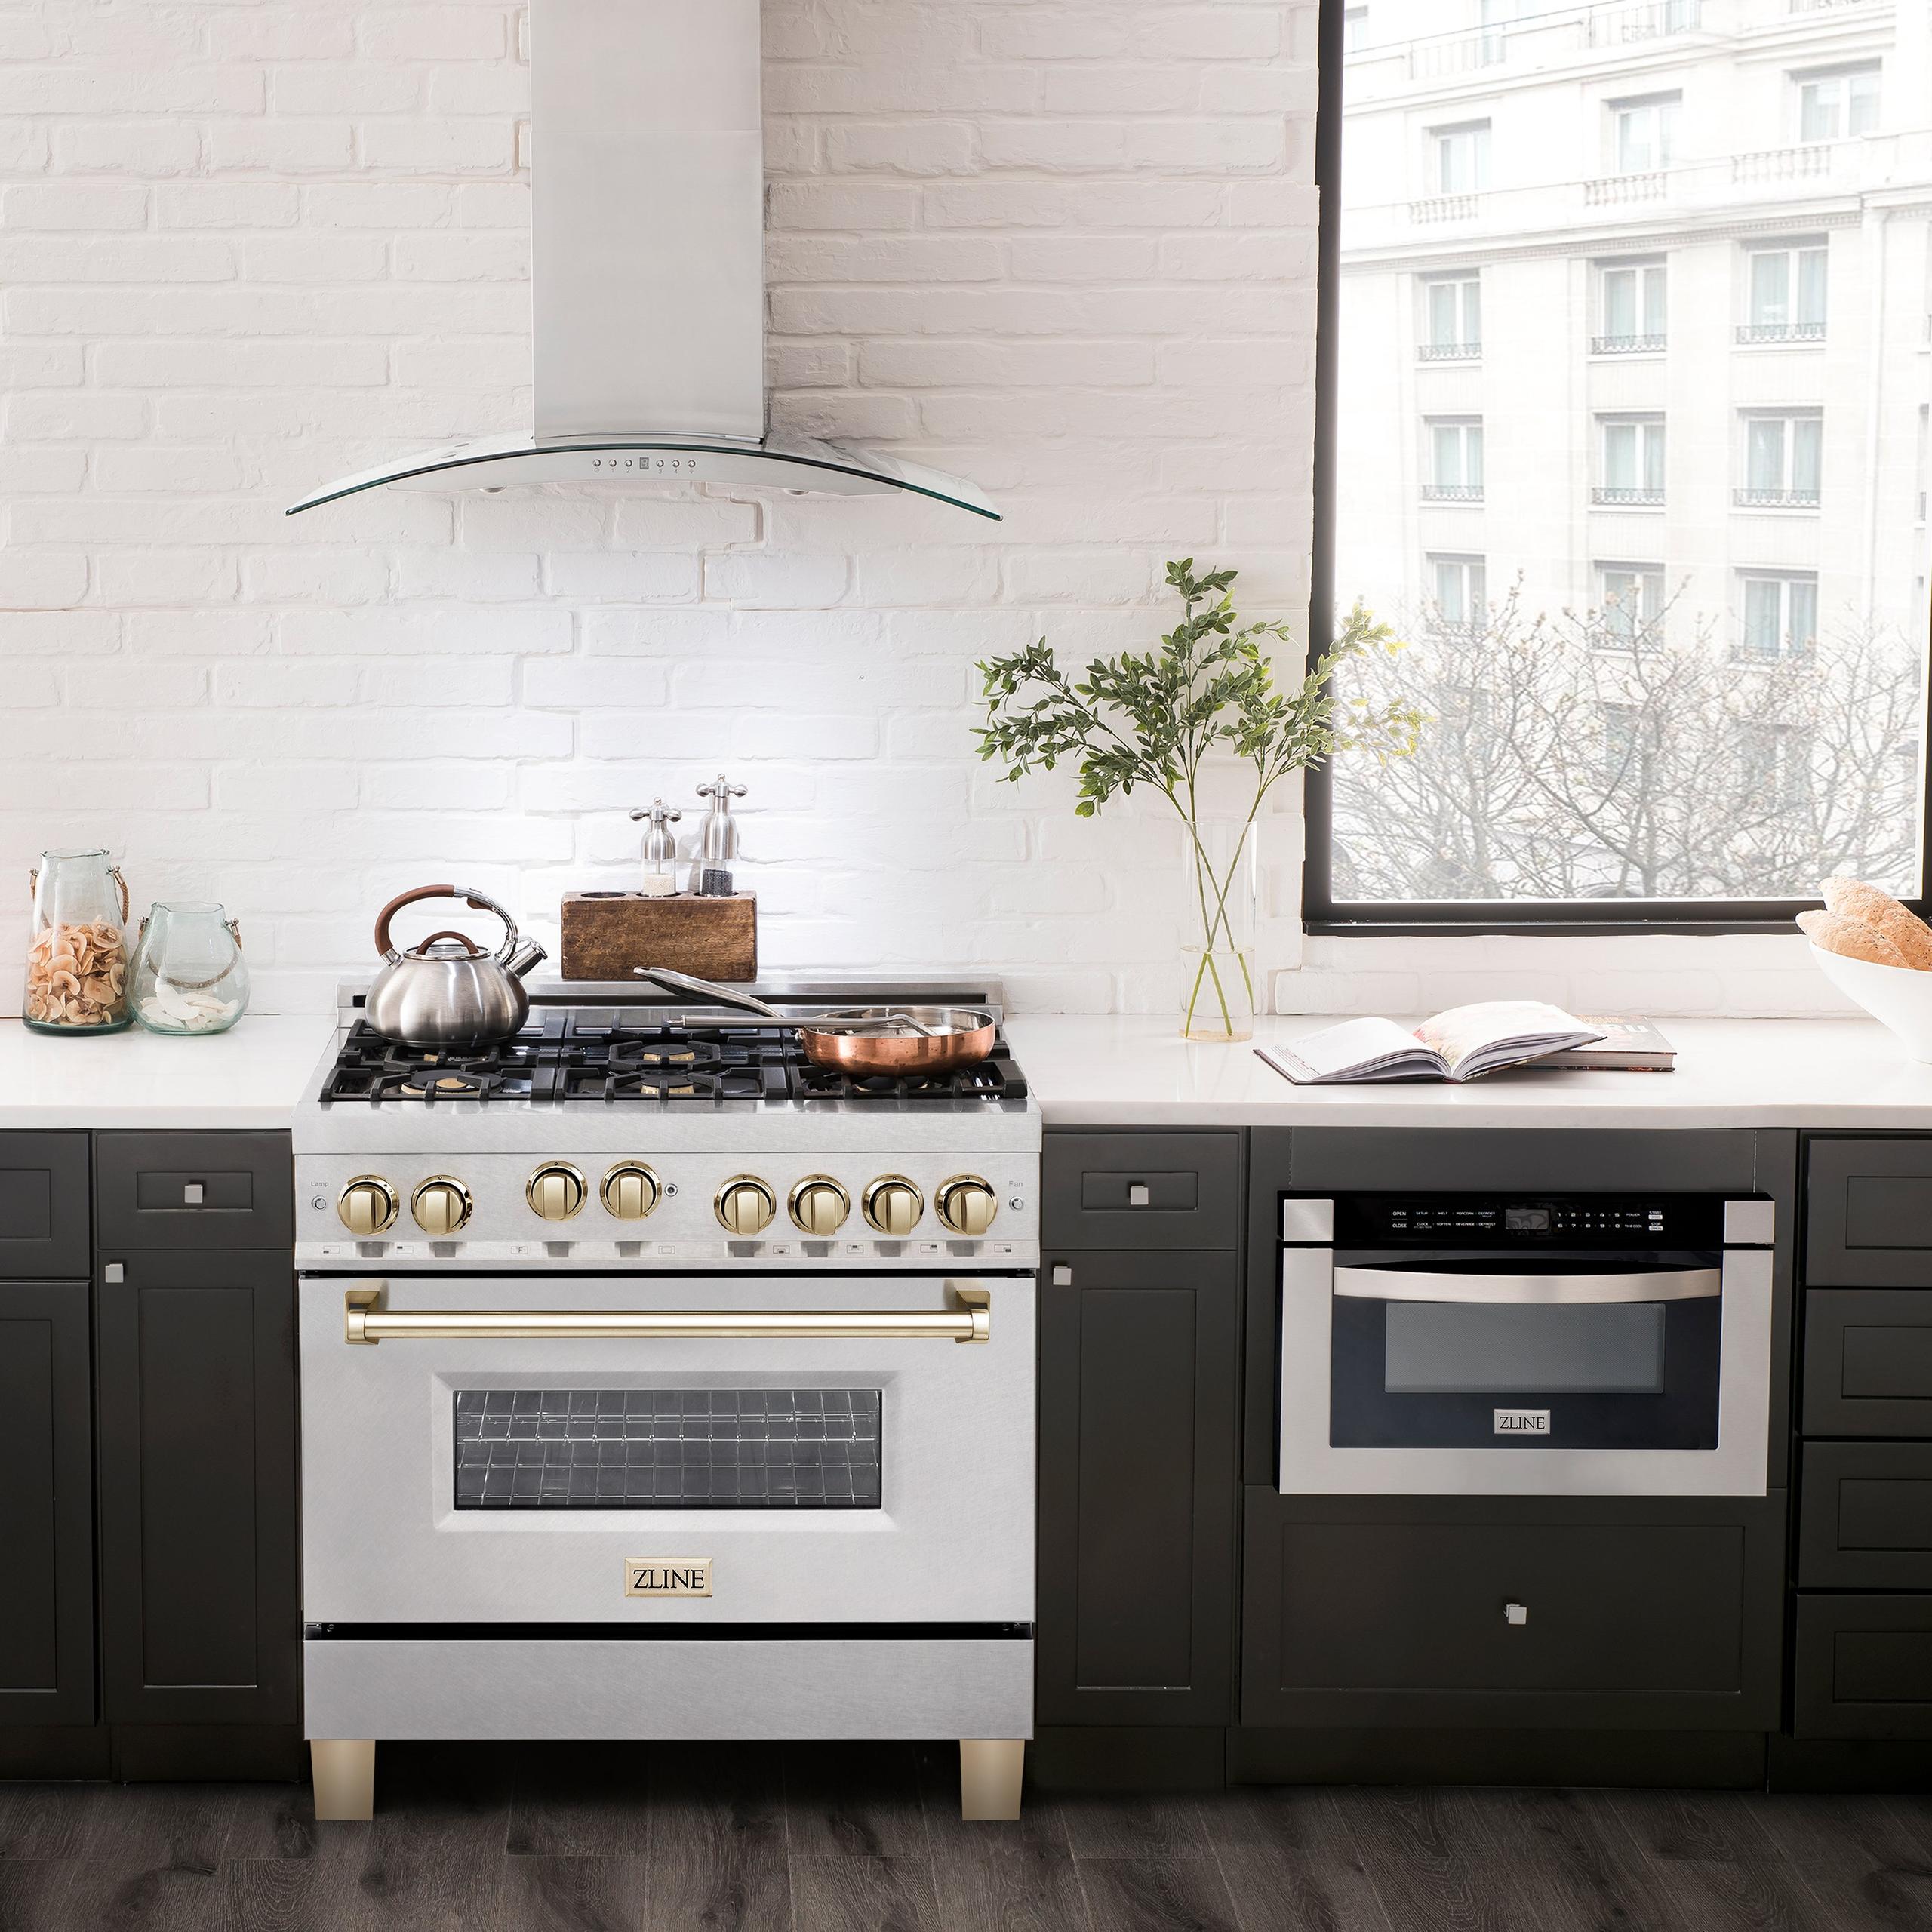 ZLINE KITCHEN AND BATH RGSZSN36CB ZLINE Autograph Edition 36" 4.6 cu. ft. Range with Gas Stove and Gas Oven in DuraSnow R Stainless Steel with Accents Color: Champagne Bronze